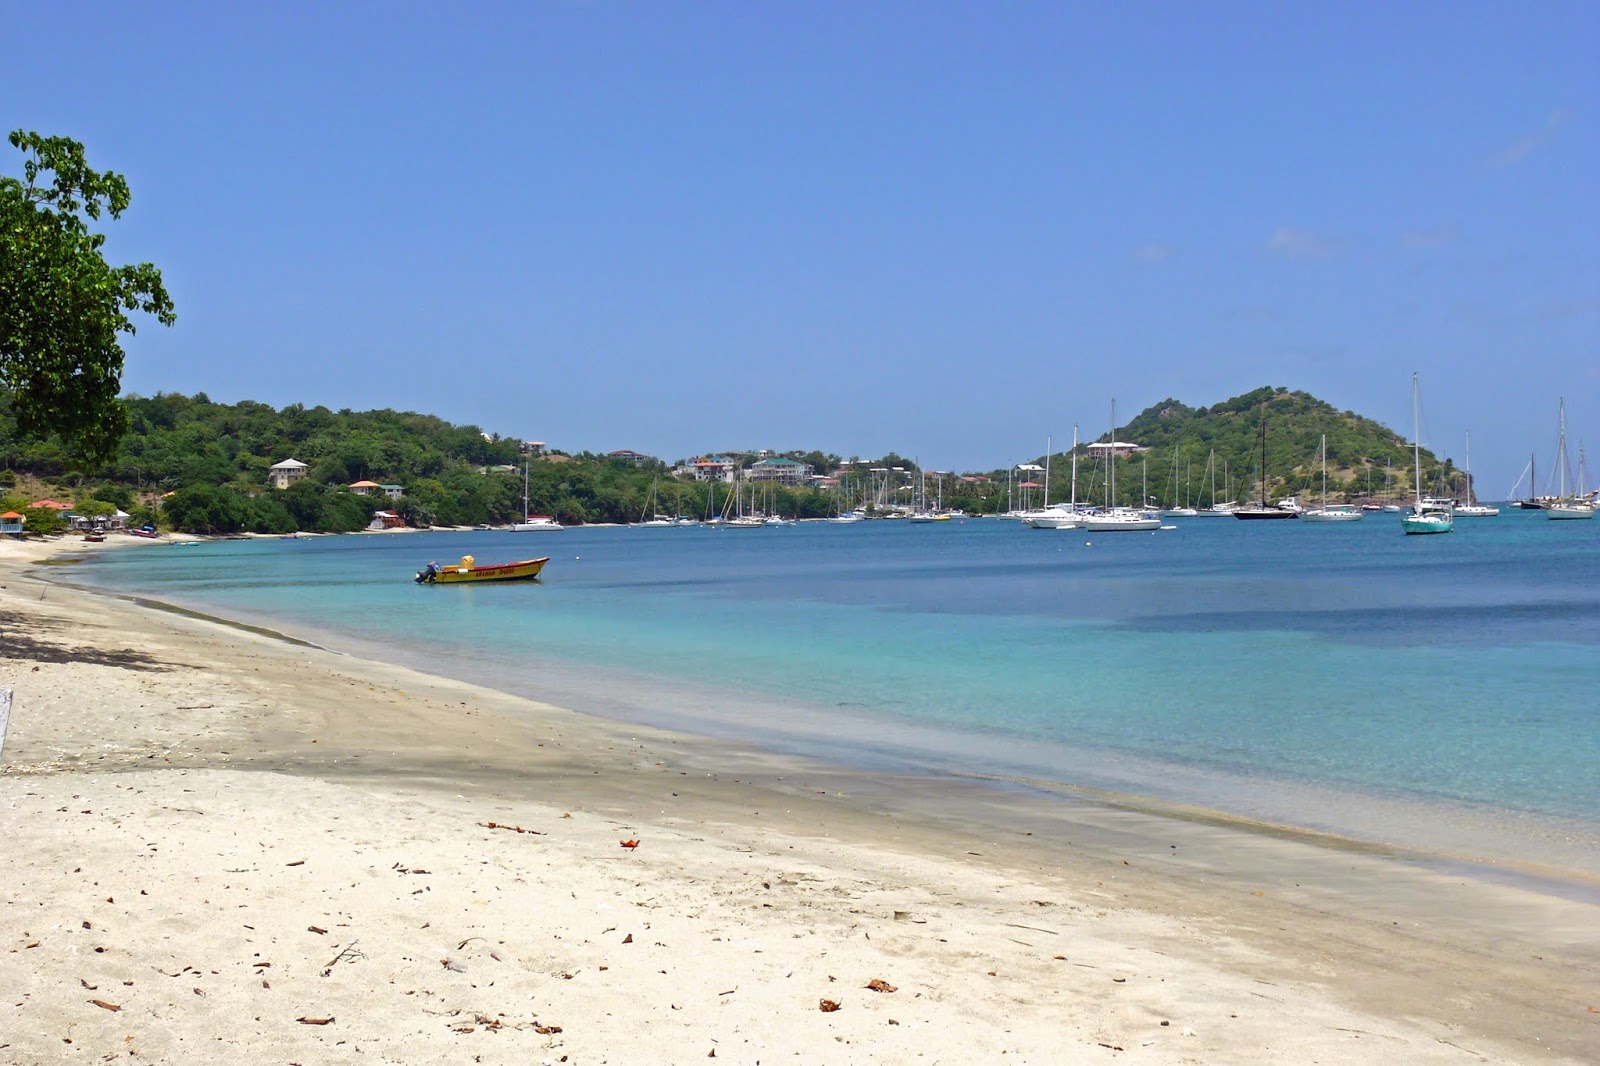 Photo of Tyrell Bay beach with bright sand surface